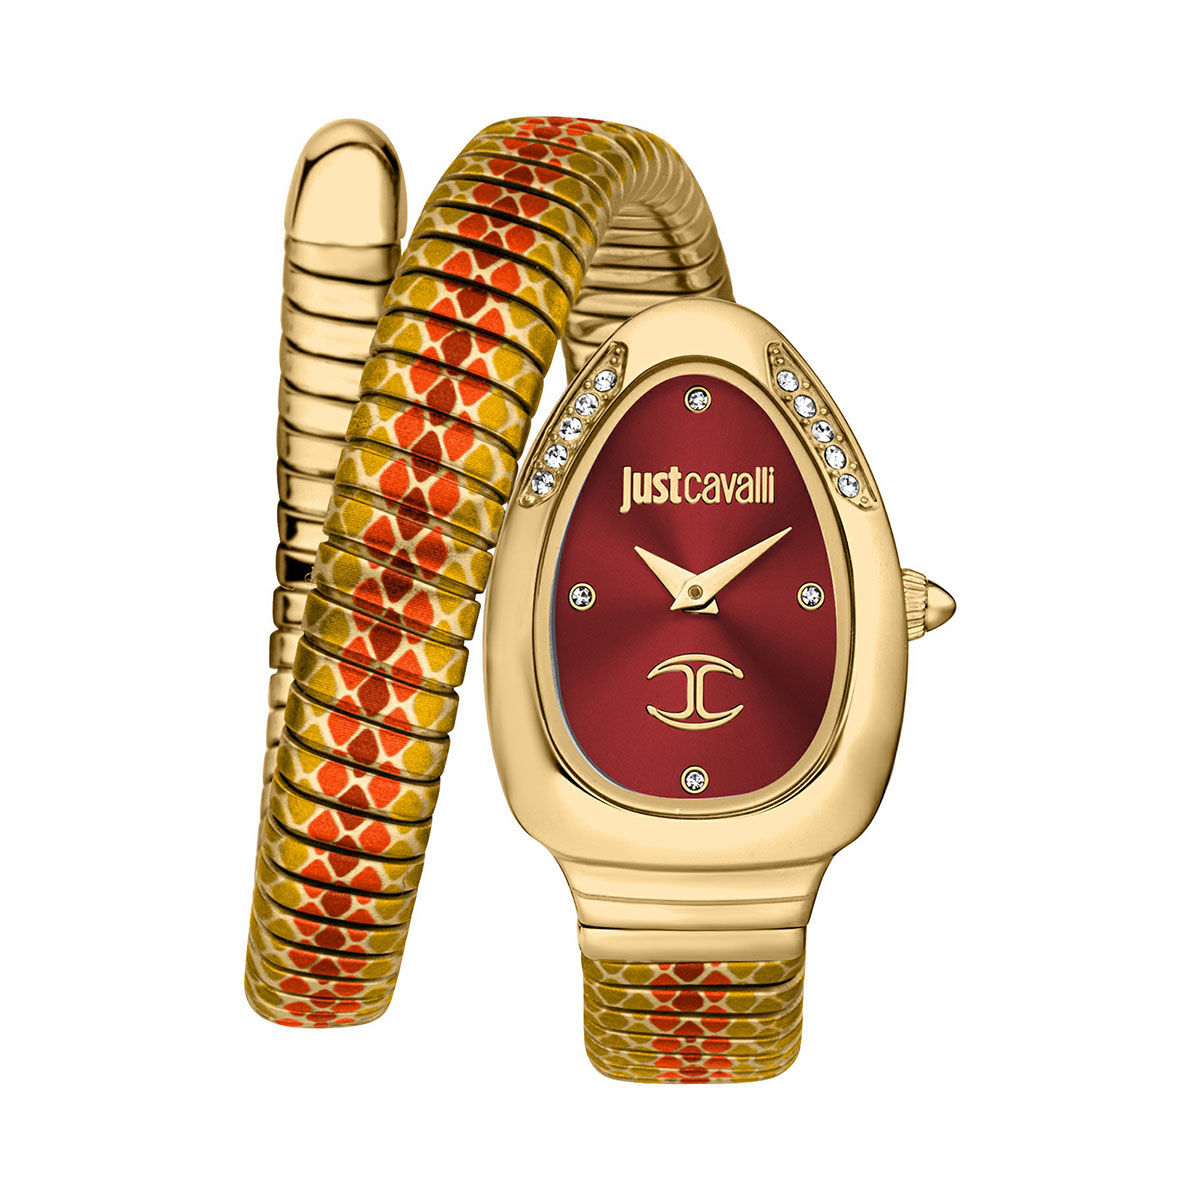 JUST CAVALLI JC1L251M0015 Pelle Solo Analog Watch for Women